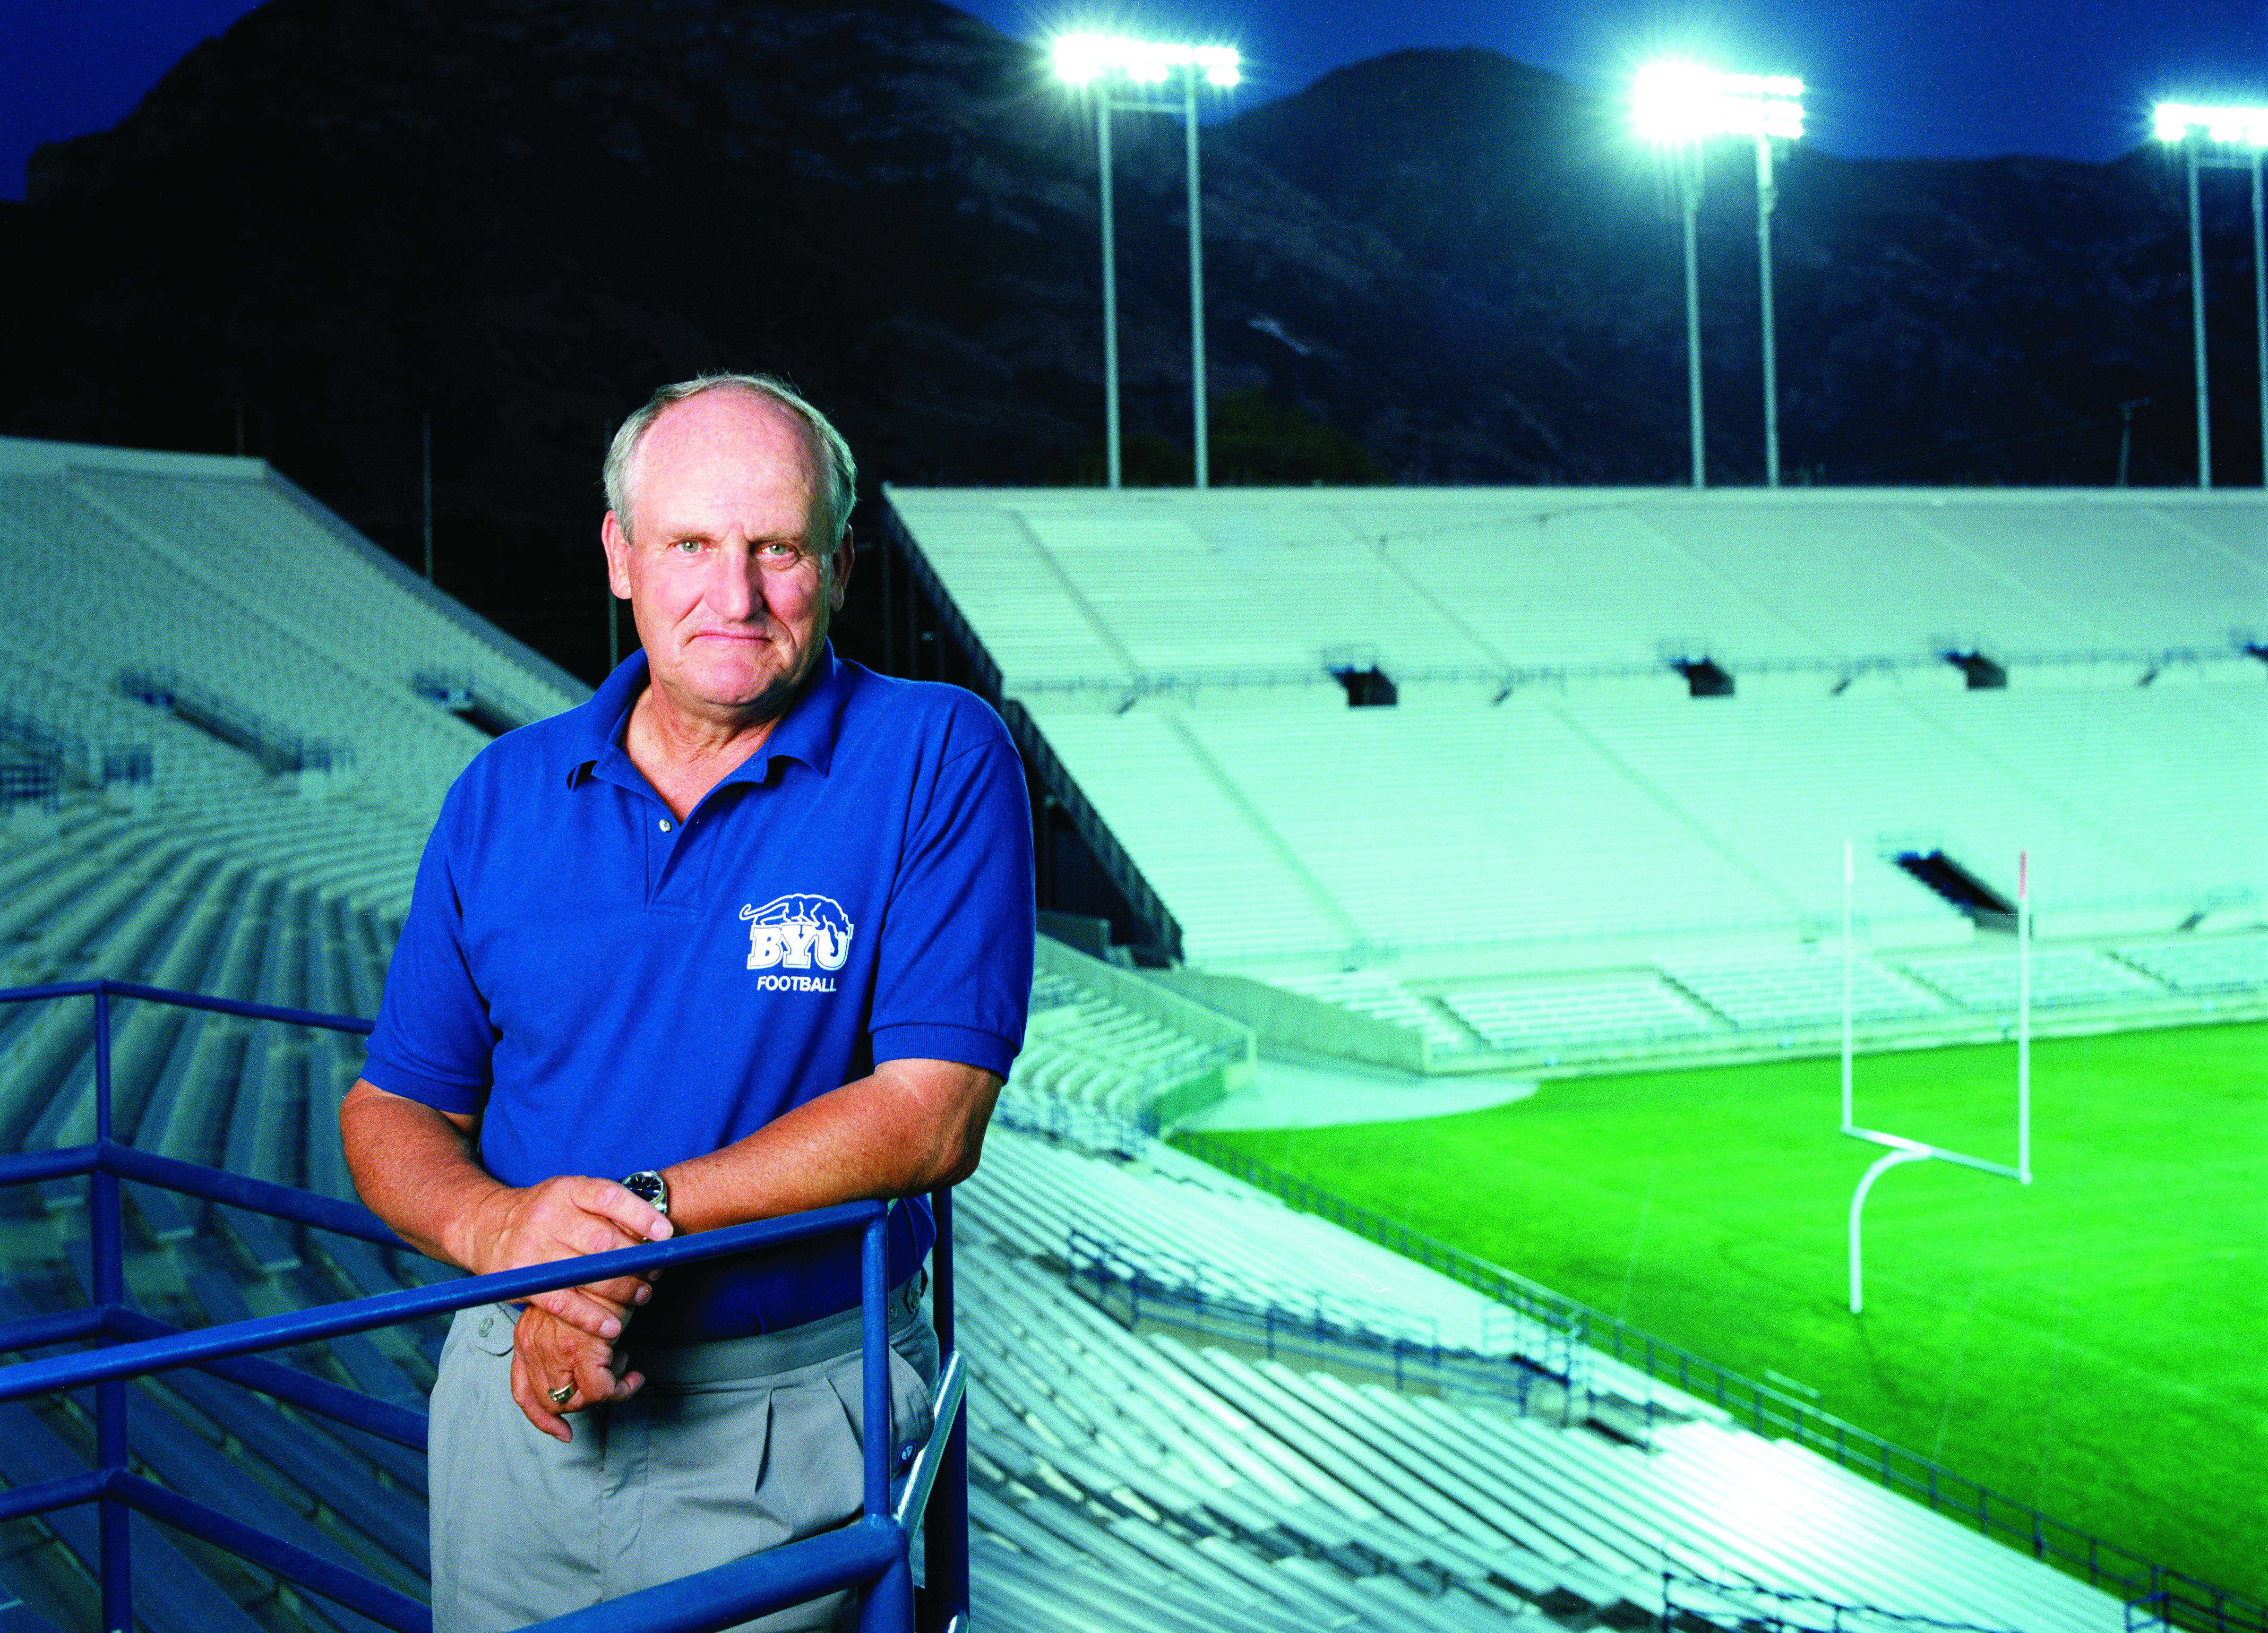 A throwback photo of legendary coach LaVell Edwards posing in front of the field that would bear his name.